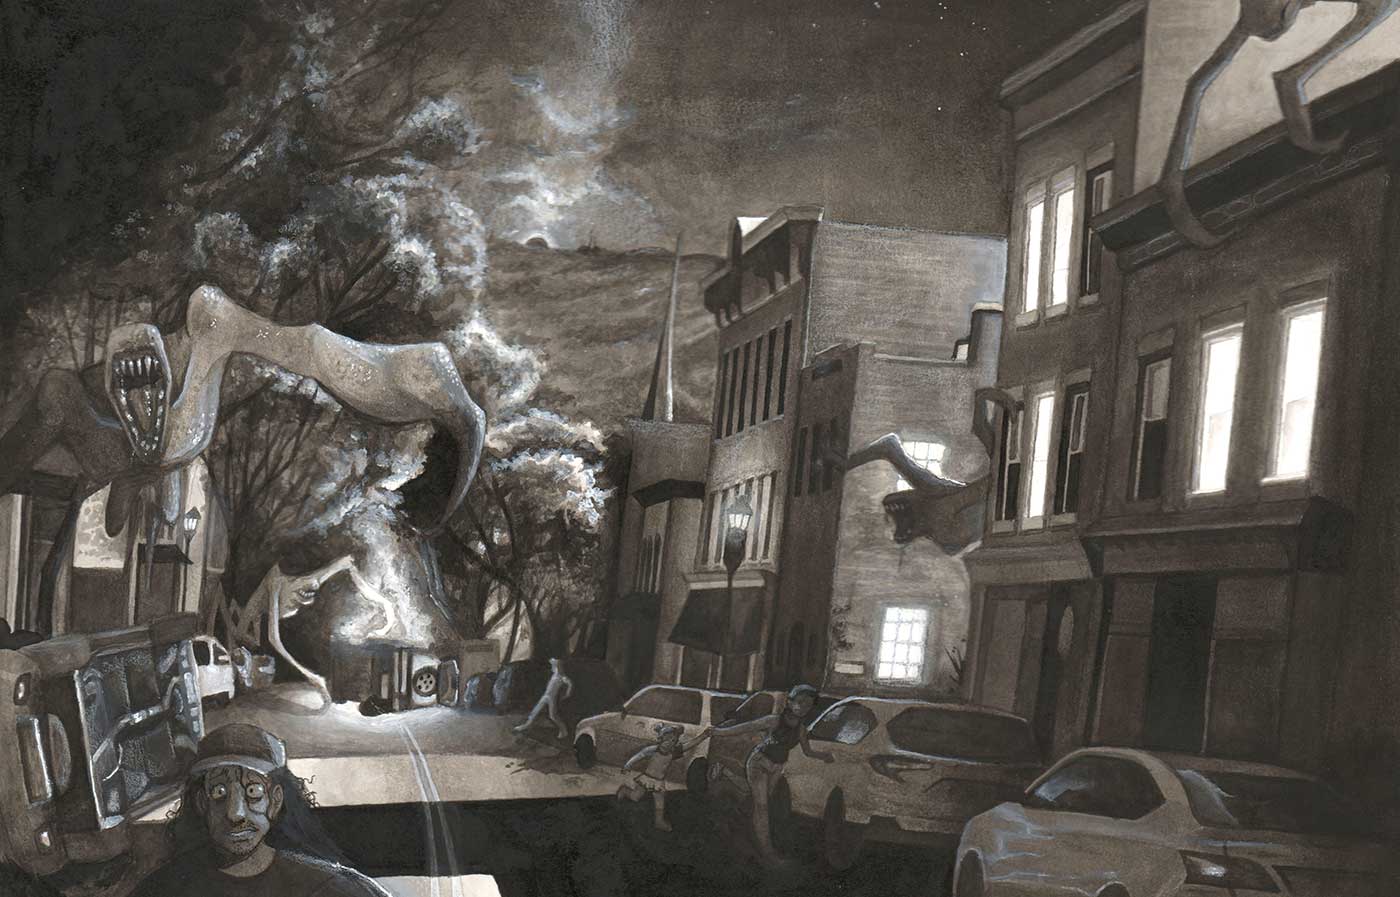 drawing of a city being attacked by creatures.